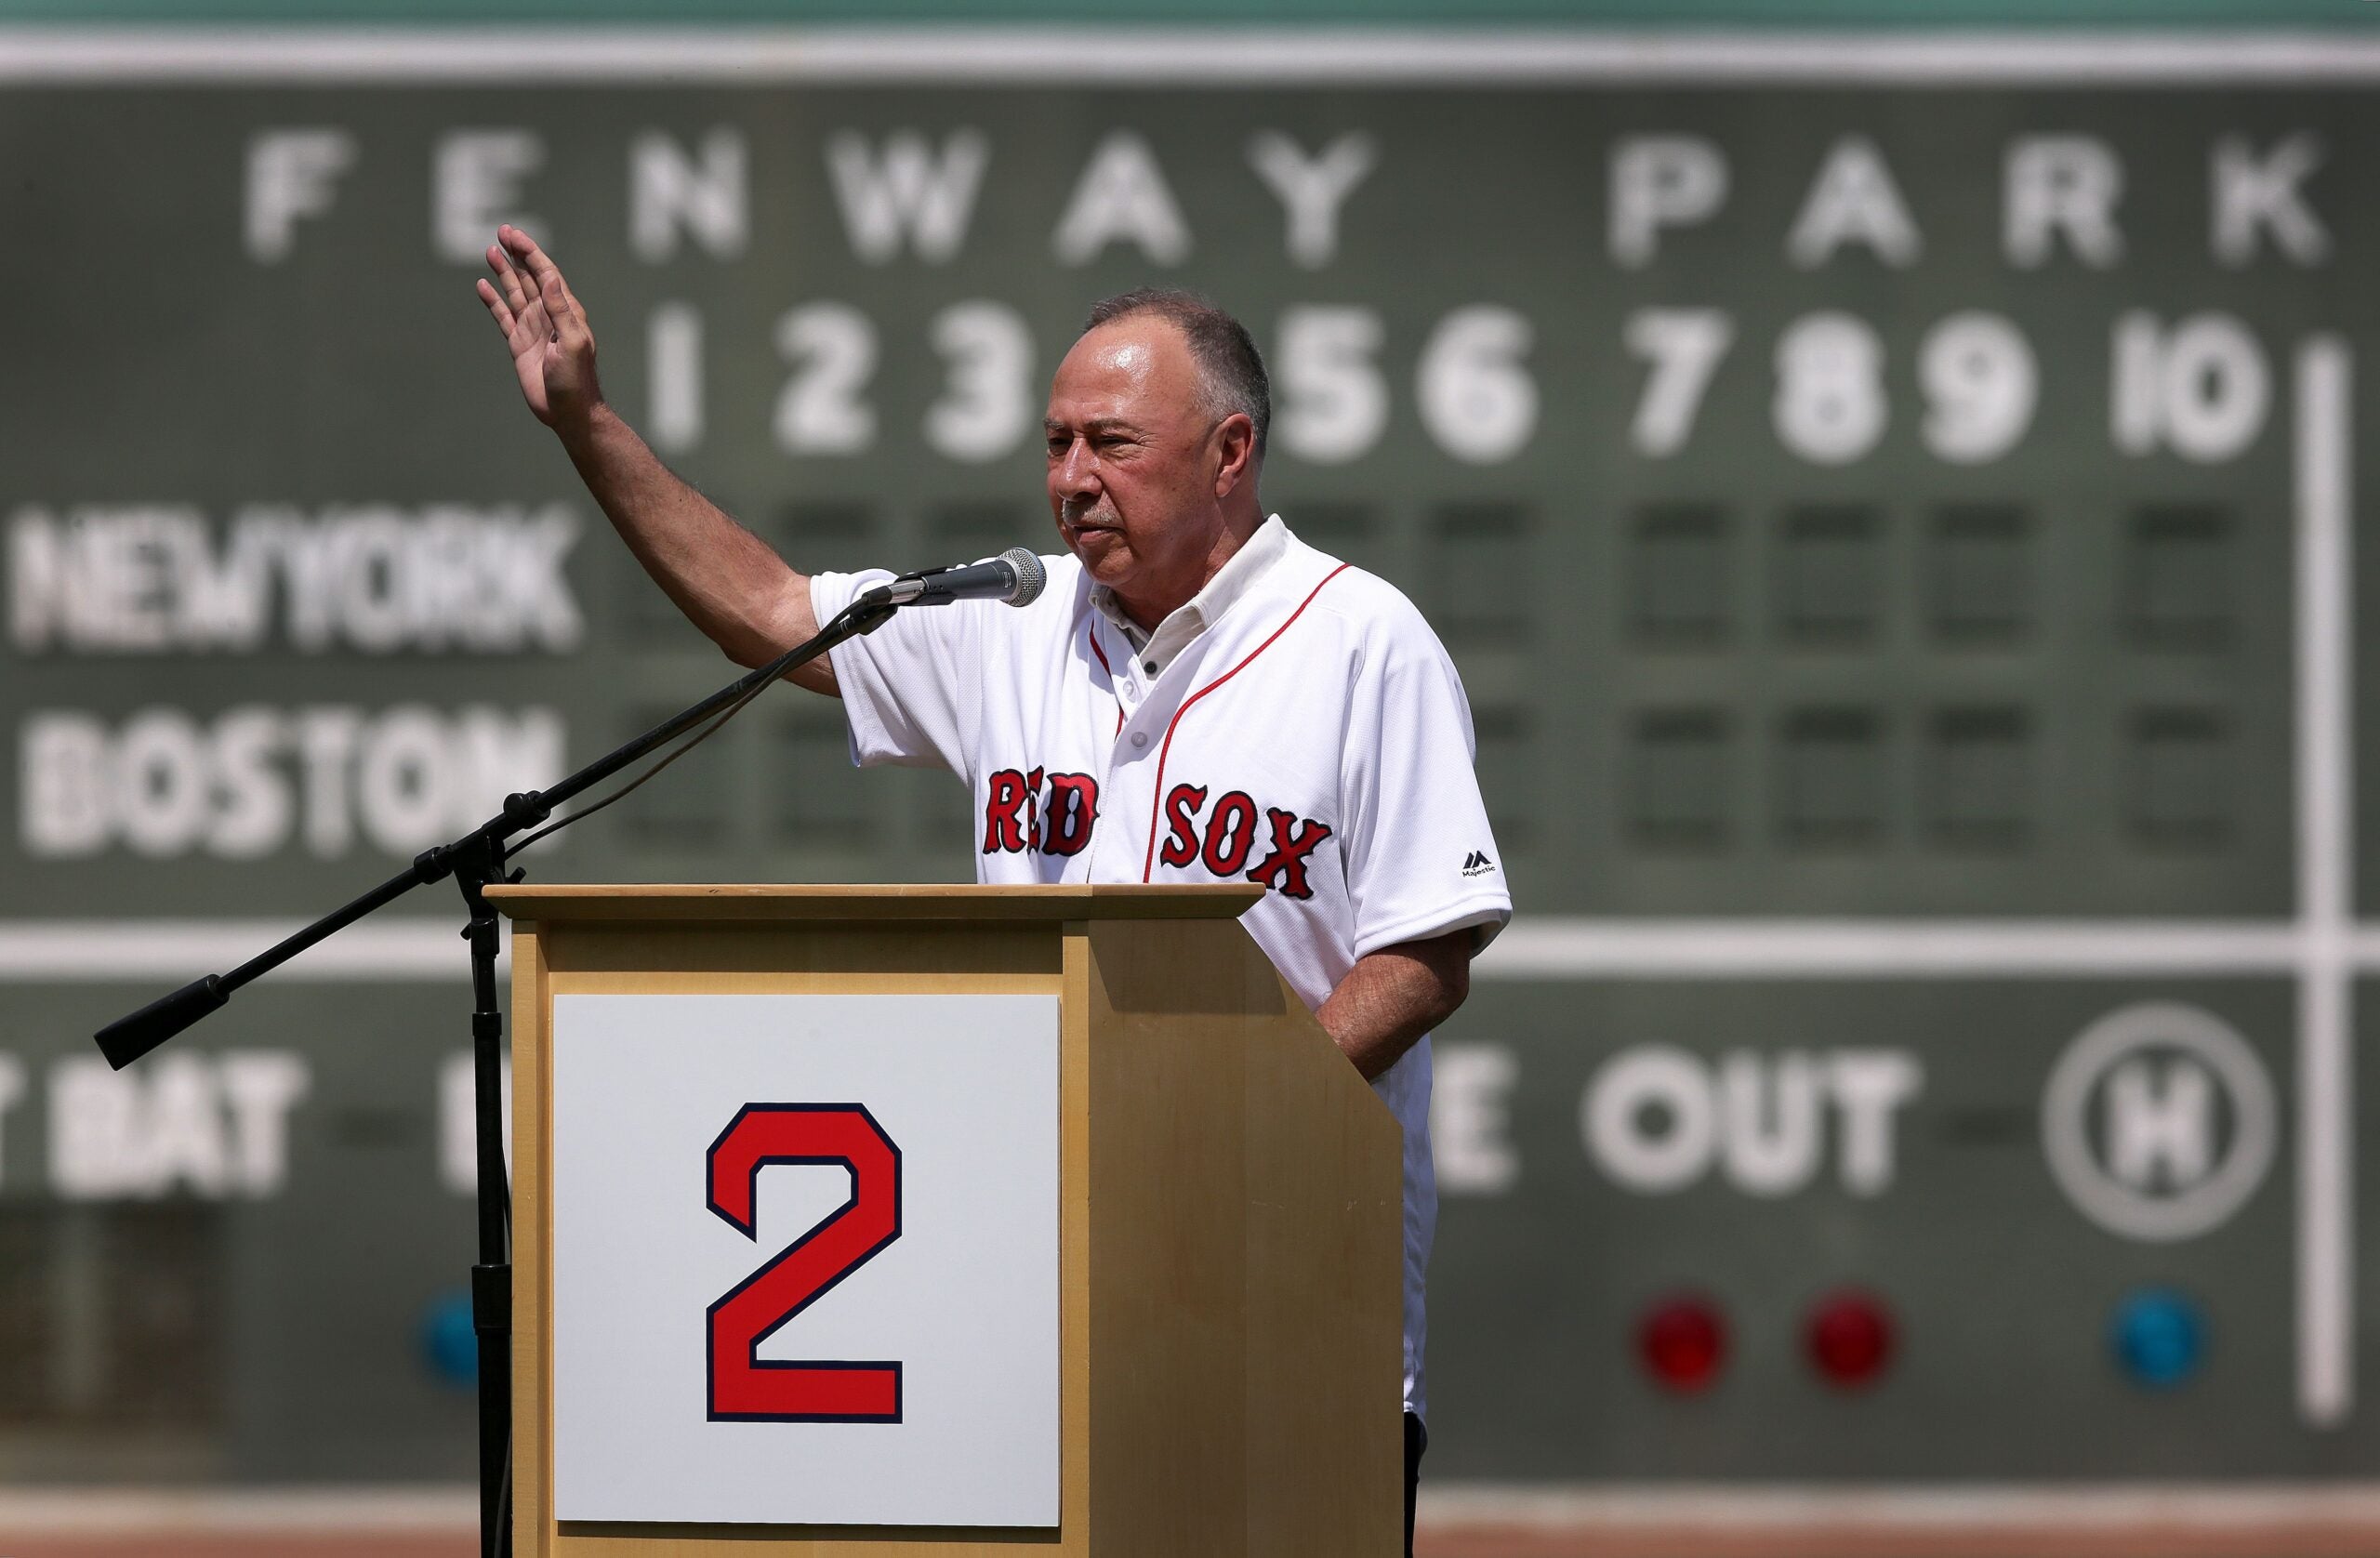 Jerry Remy's family invites public to pay respects Thursday at Waltham  funeral home